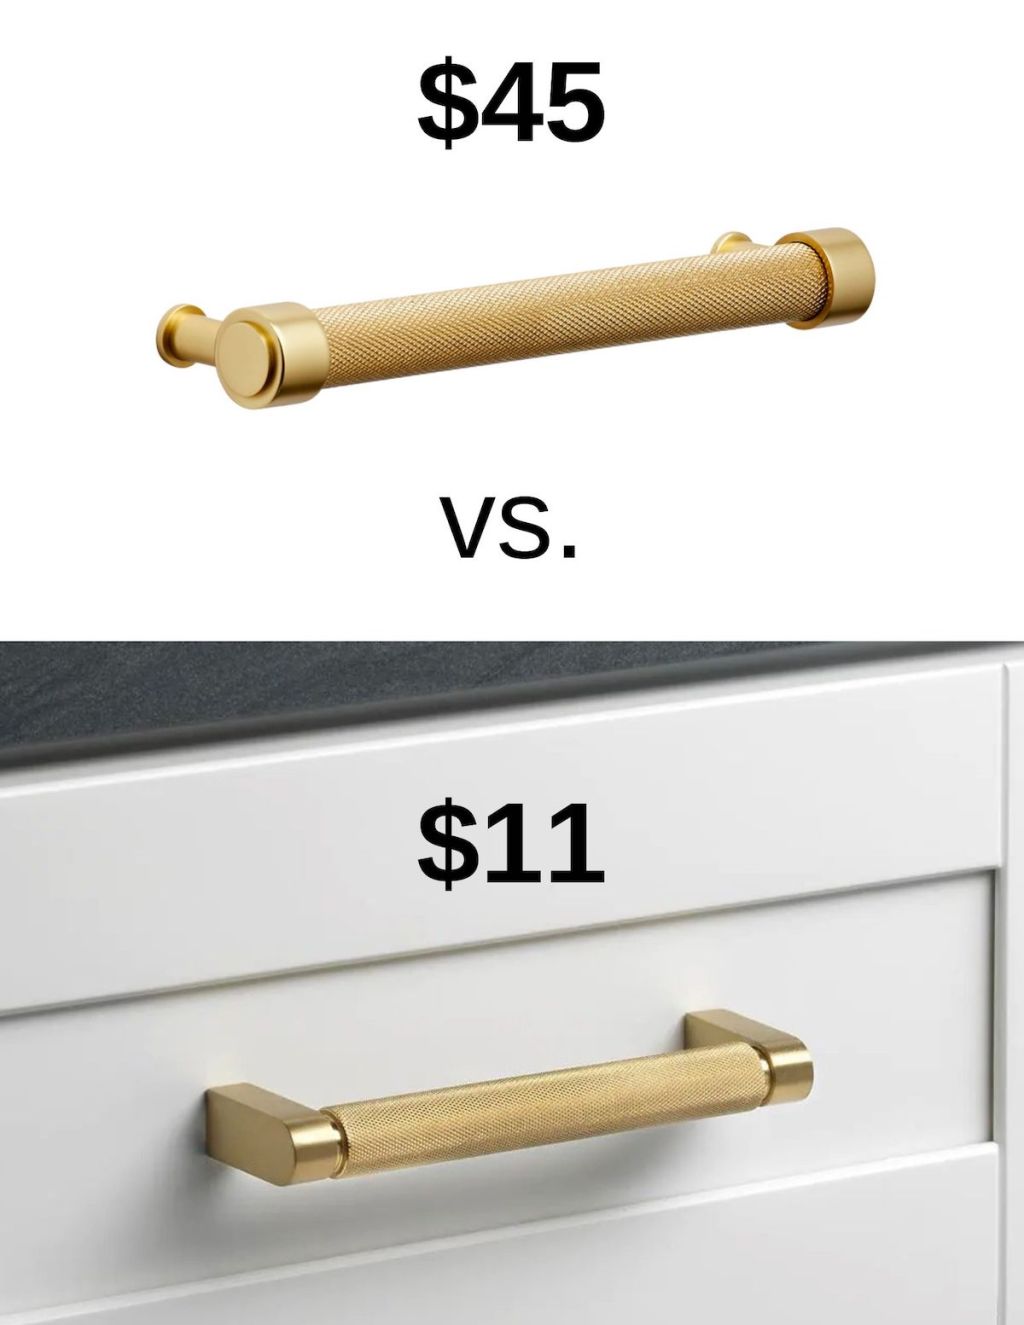 stock photos of gold hardware price difference